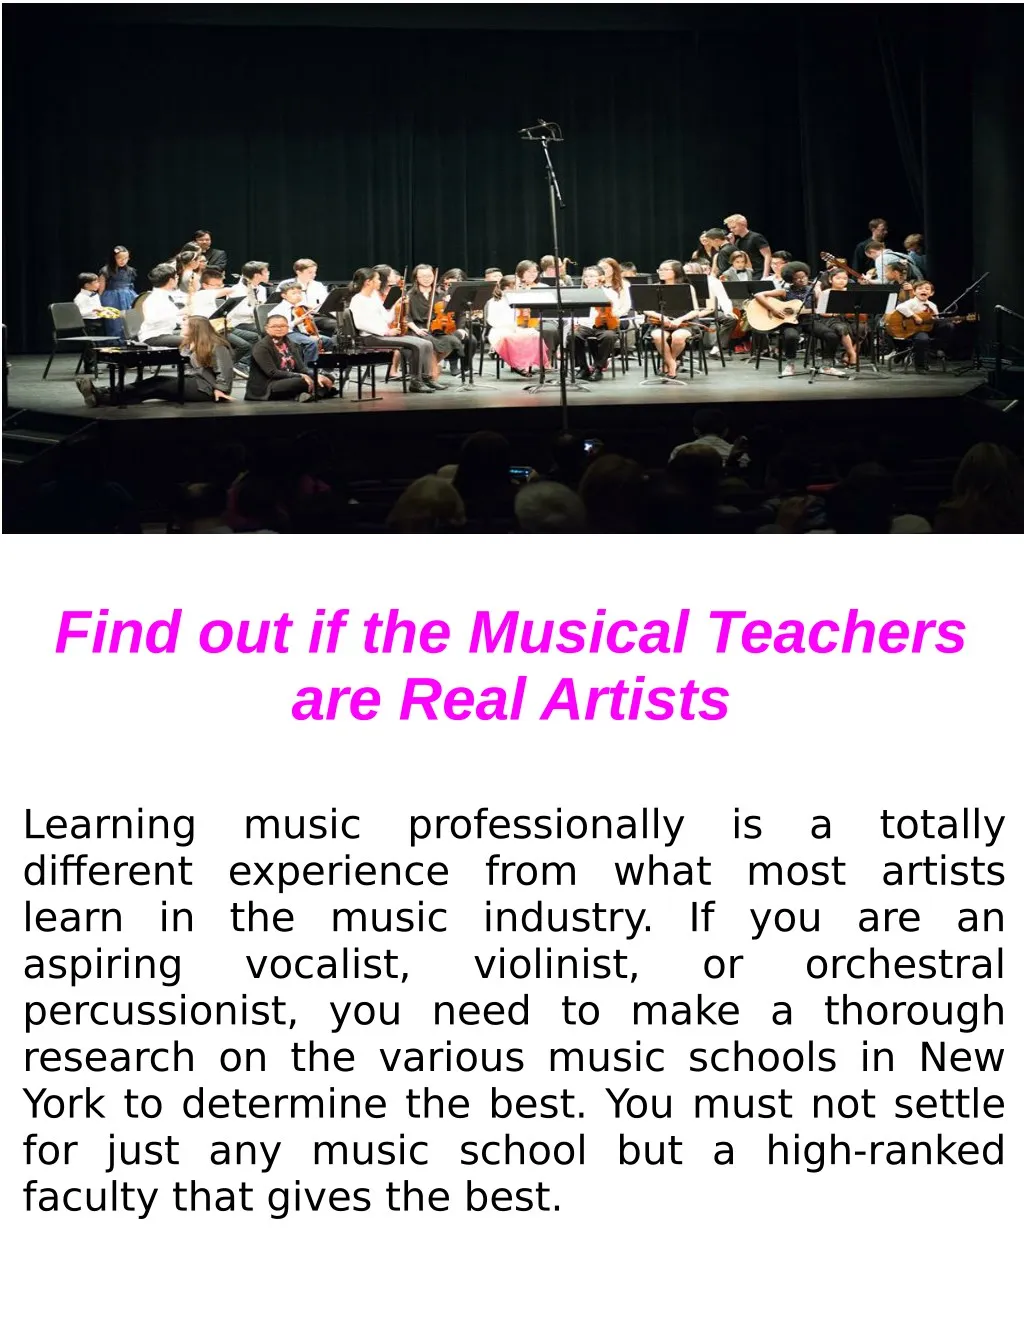 find out if the musical teachers are real artists